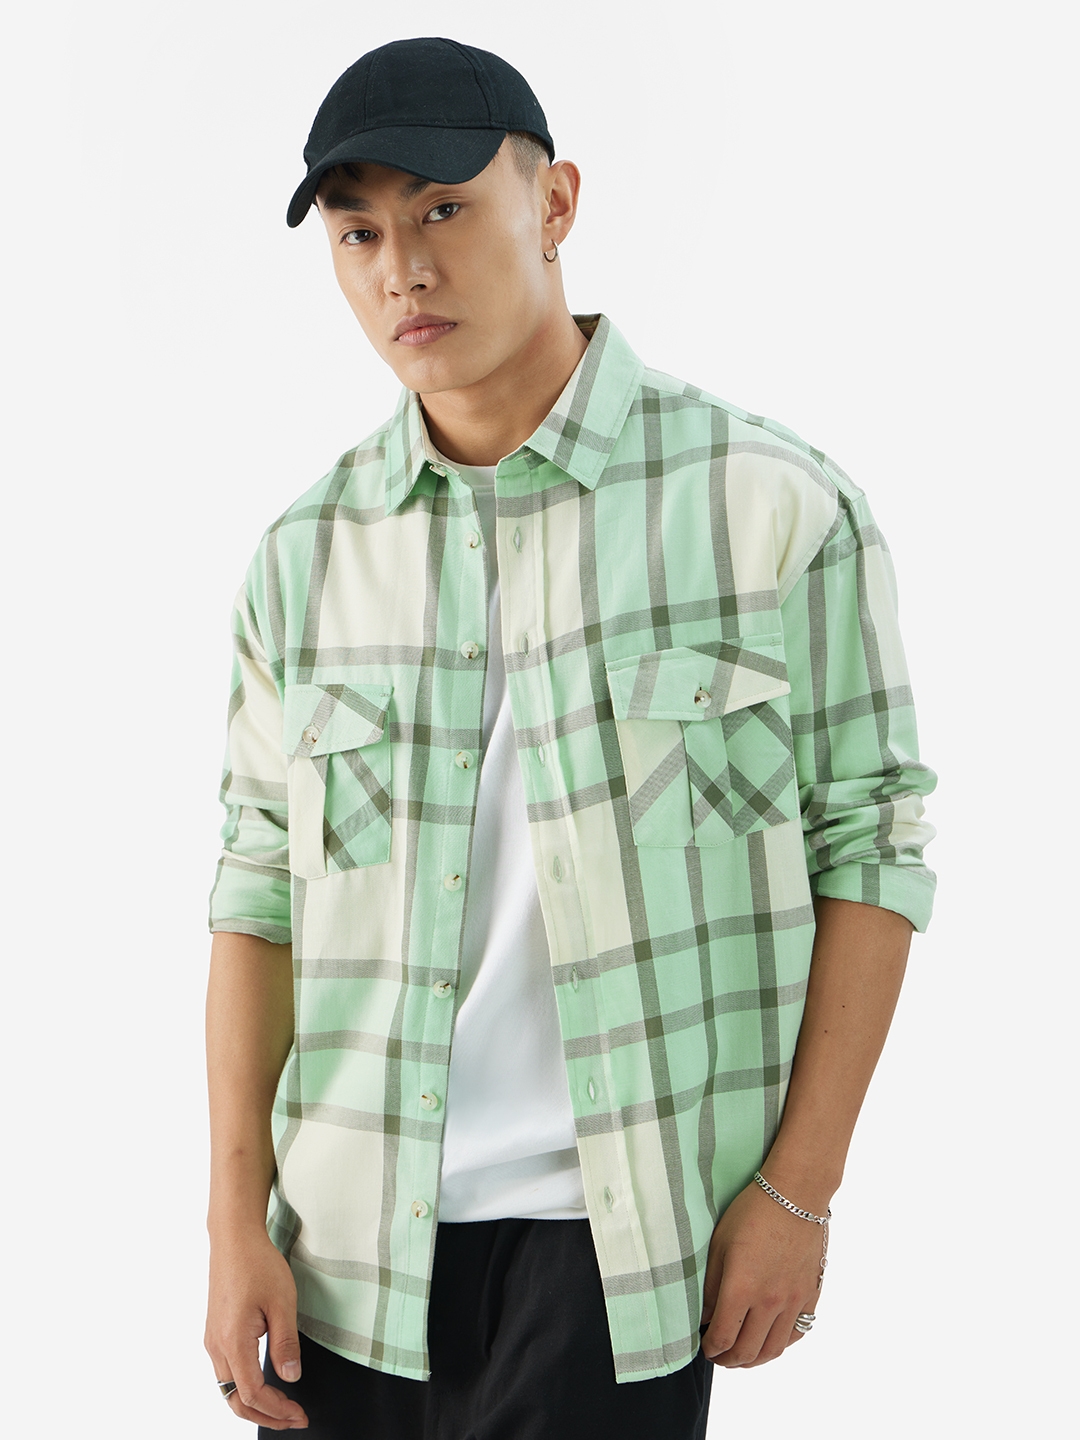 Men's Plaid: Green And White Men's Relaxed Shirts